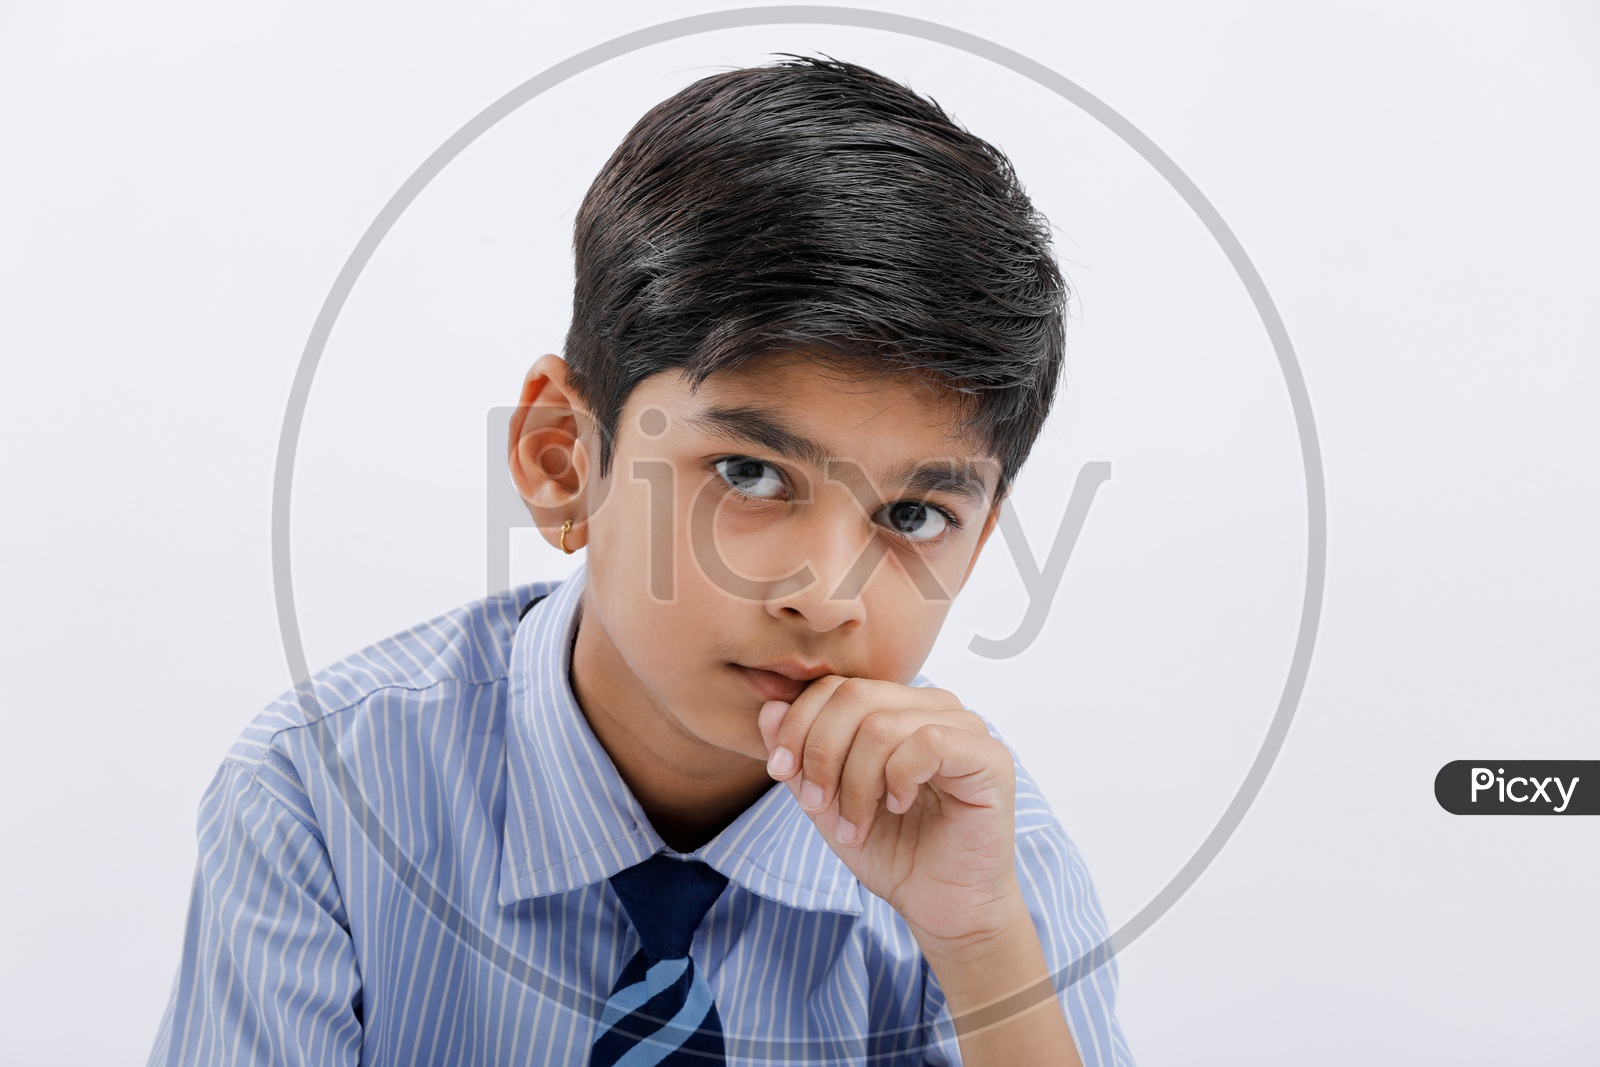 Indian School Boy Or Kid Wearing Uniform And Posing Over White Isolated Background